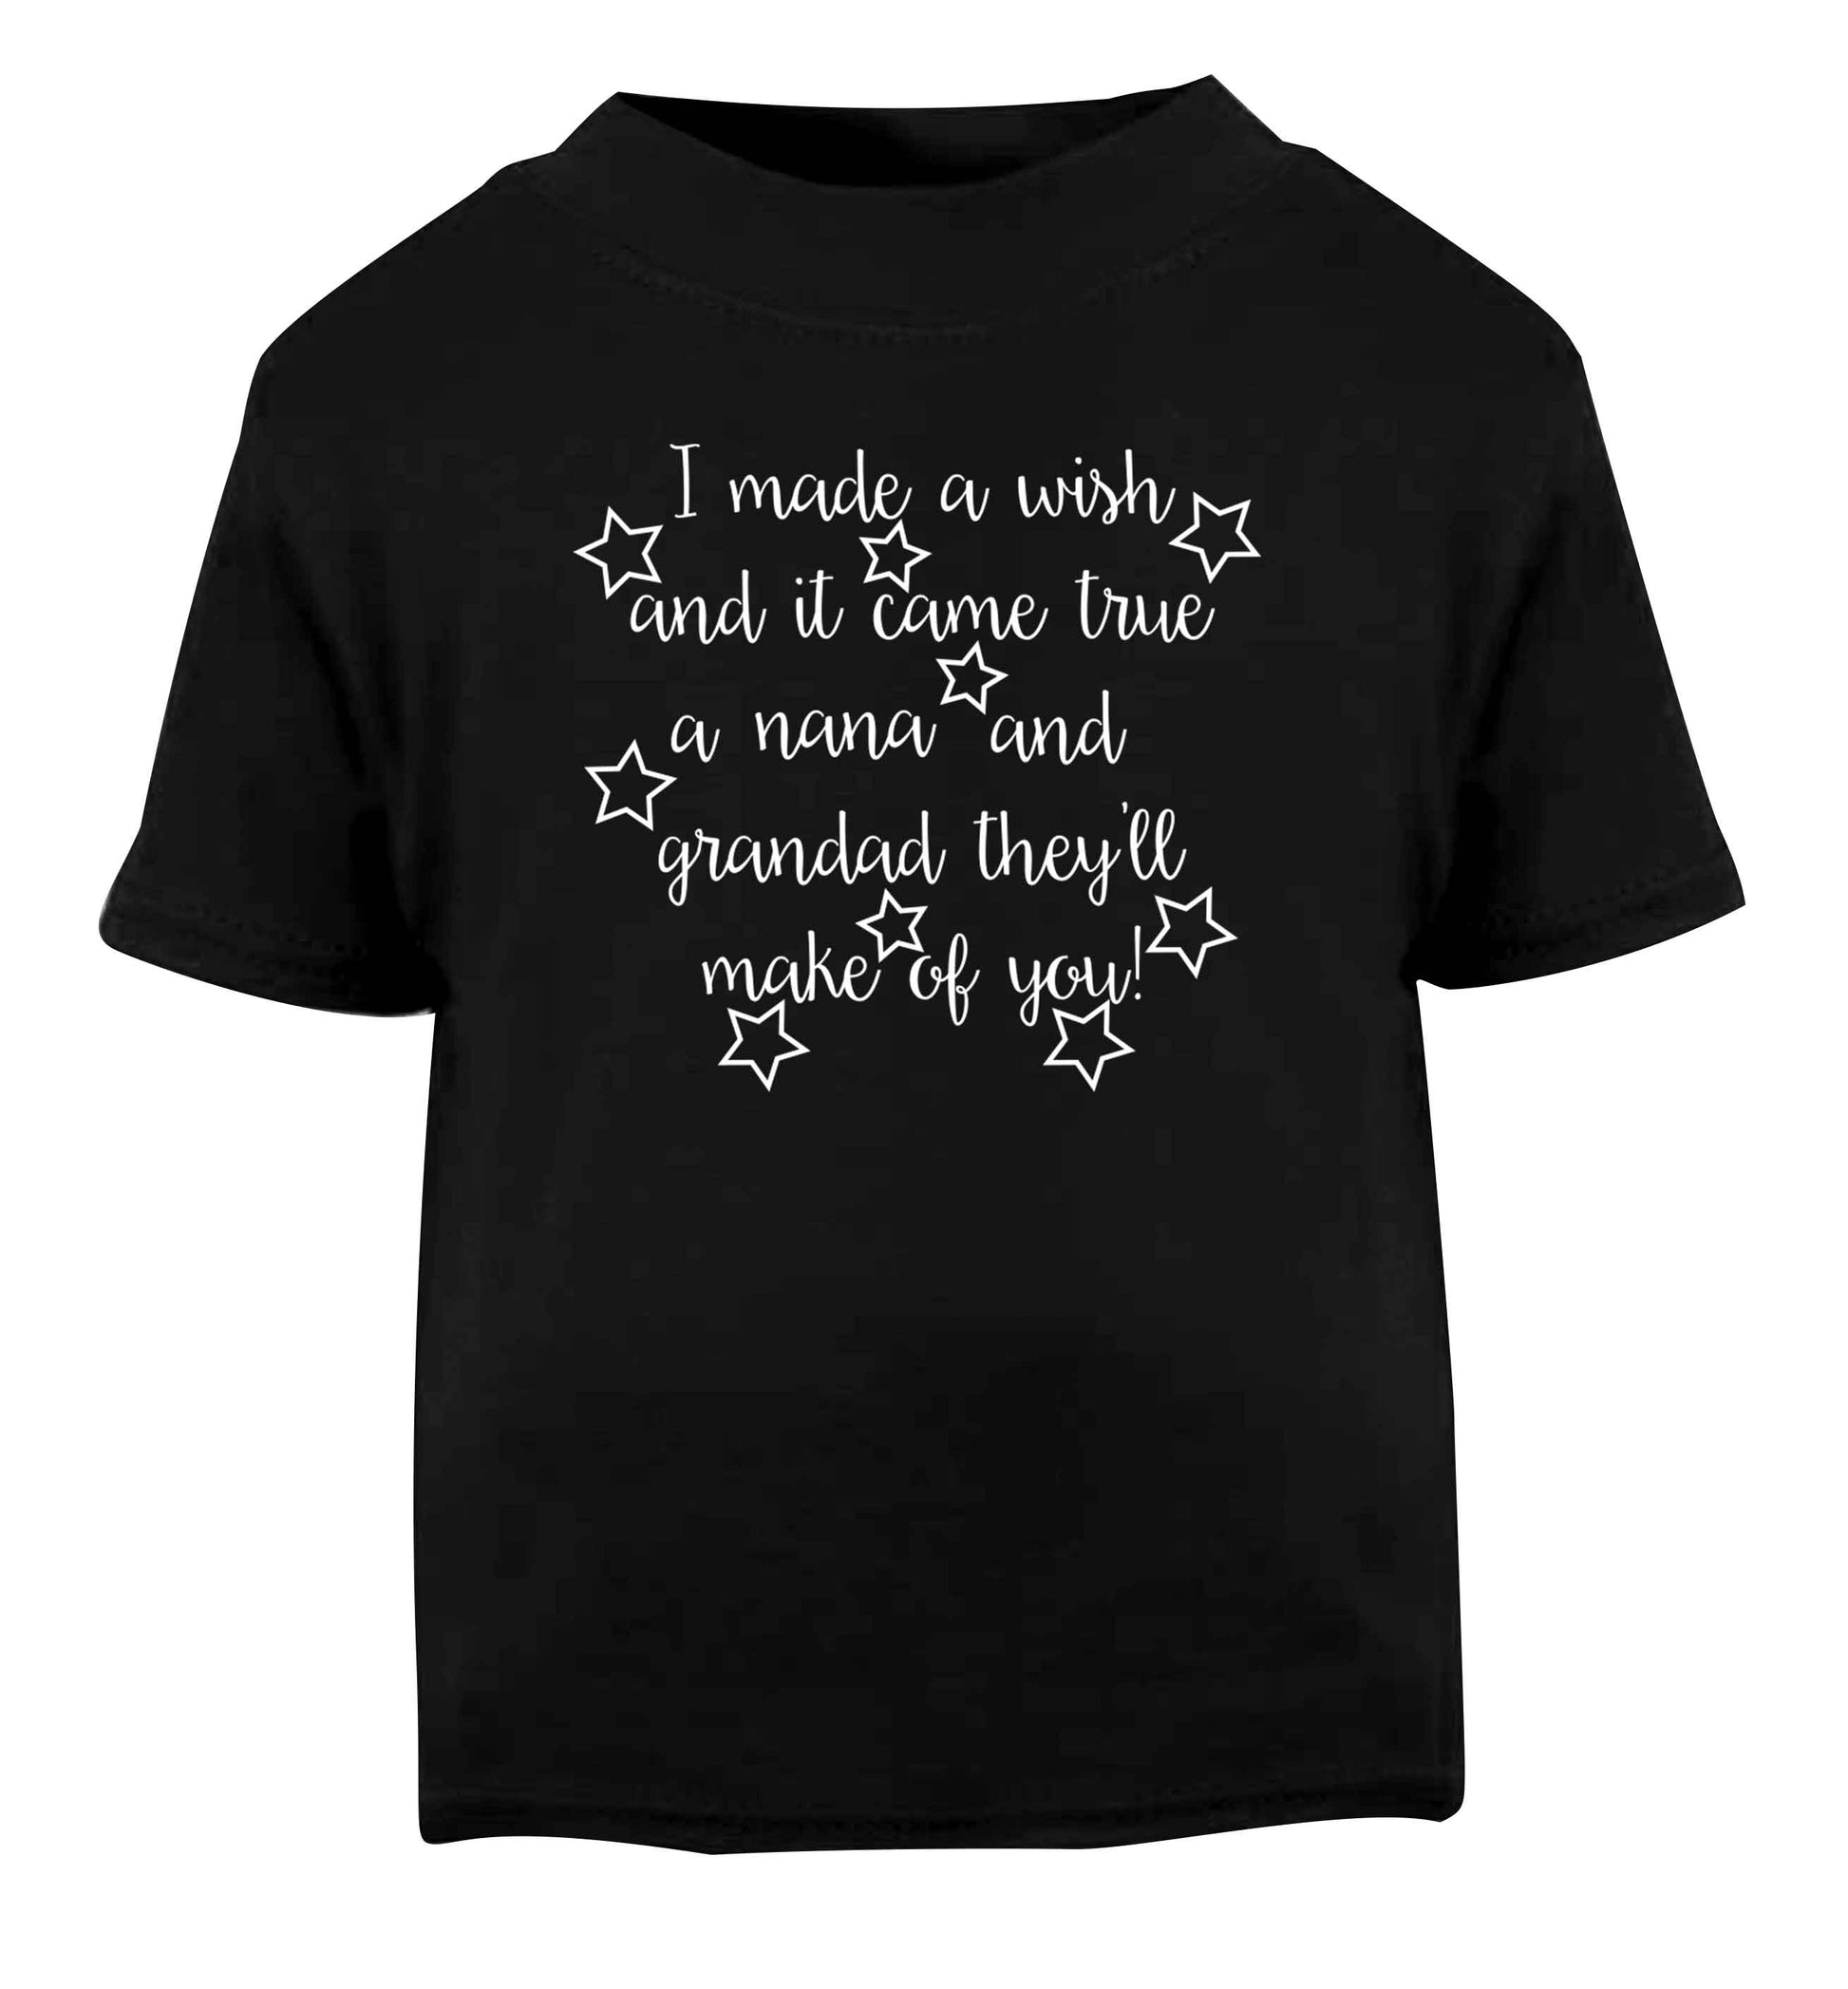 I made a wish and it came true a nana and grandad they'll make of you! Black Baby Toddler Tshirt 2 years